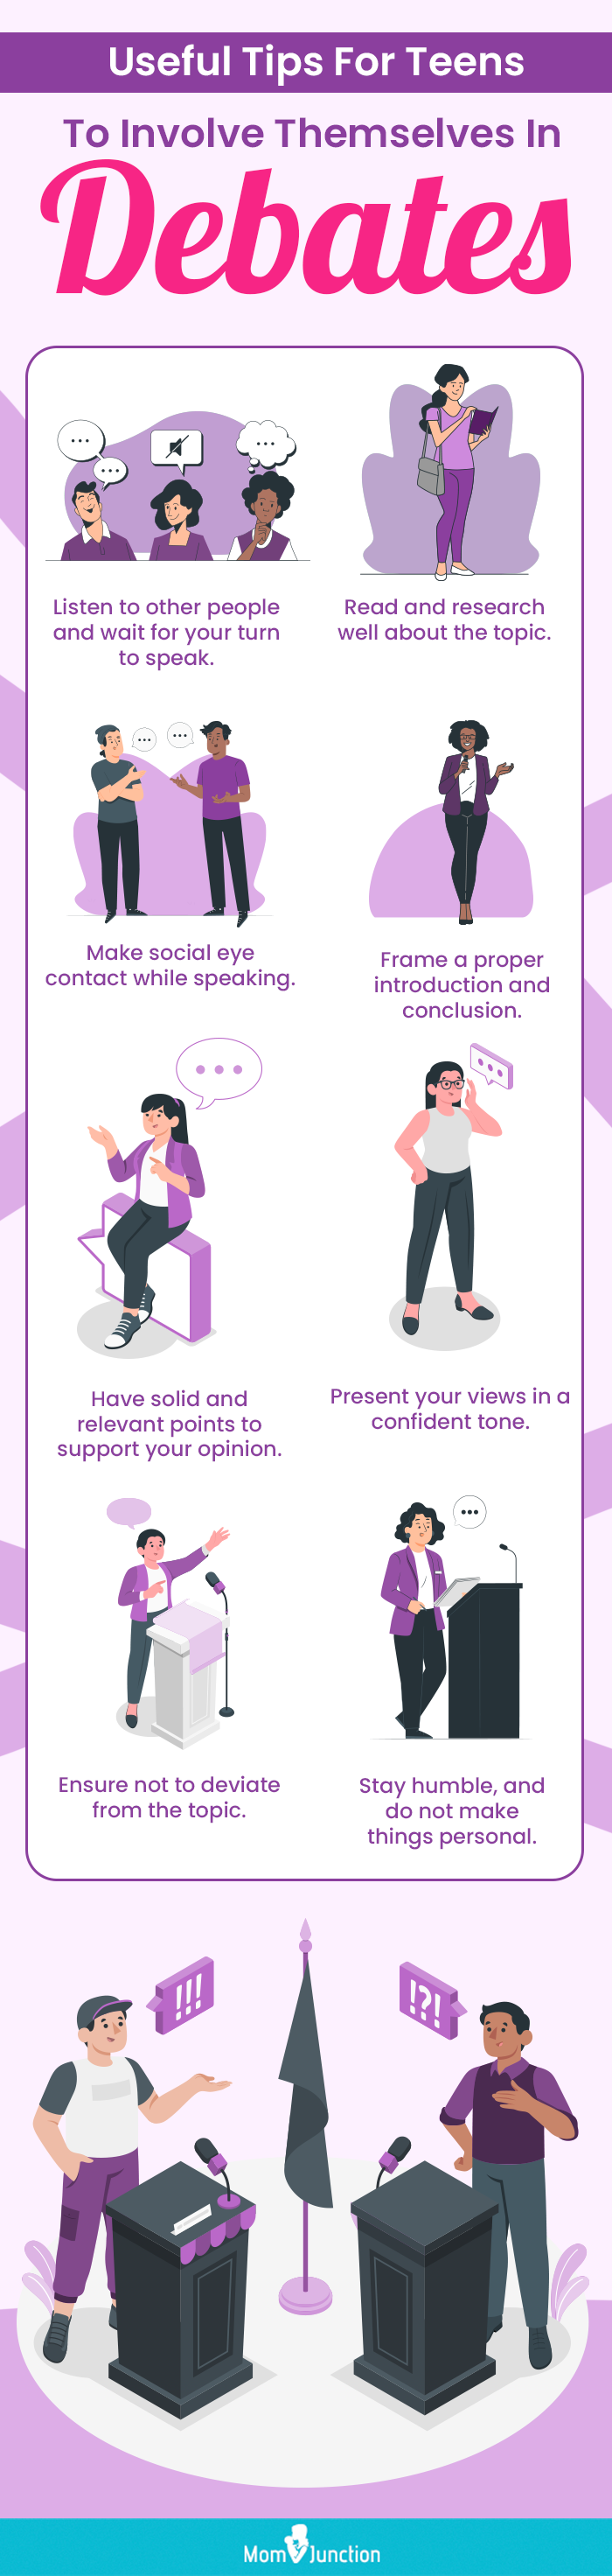 useful tips for teens to involve themselves in debates (infographic)